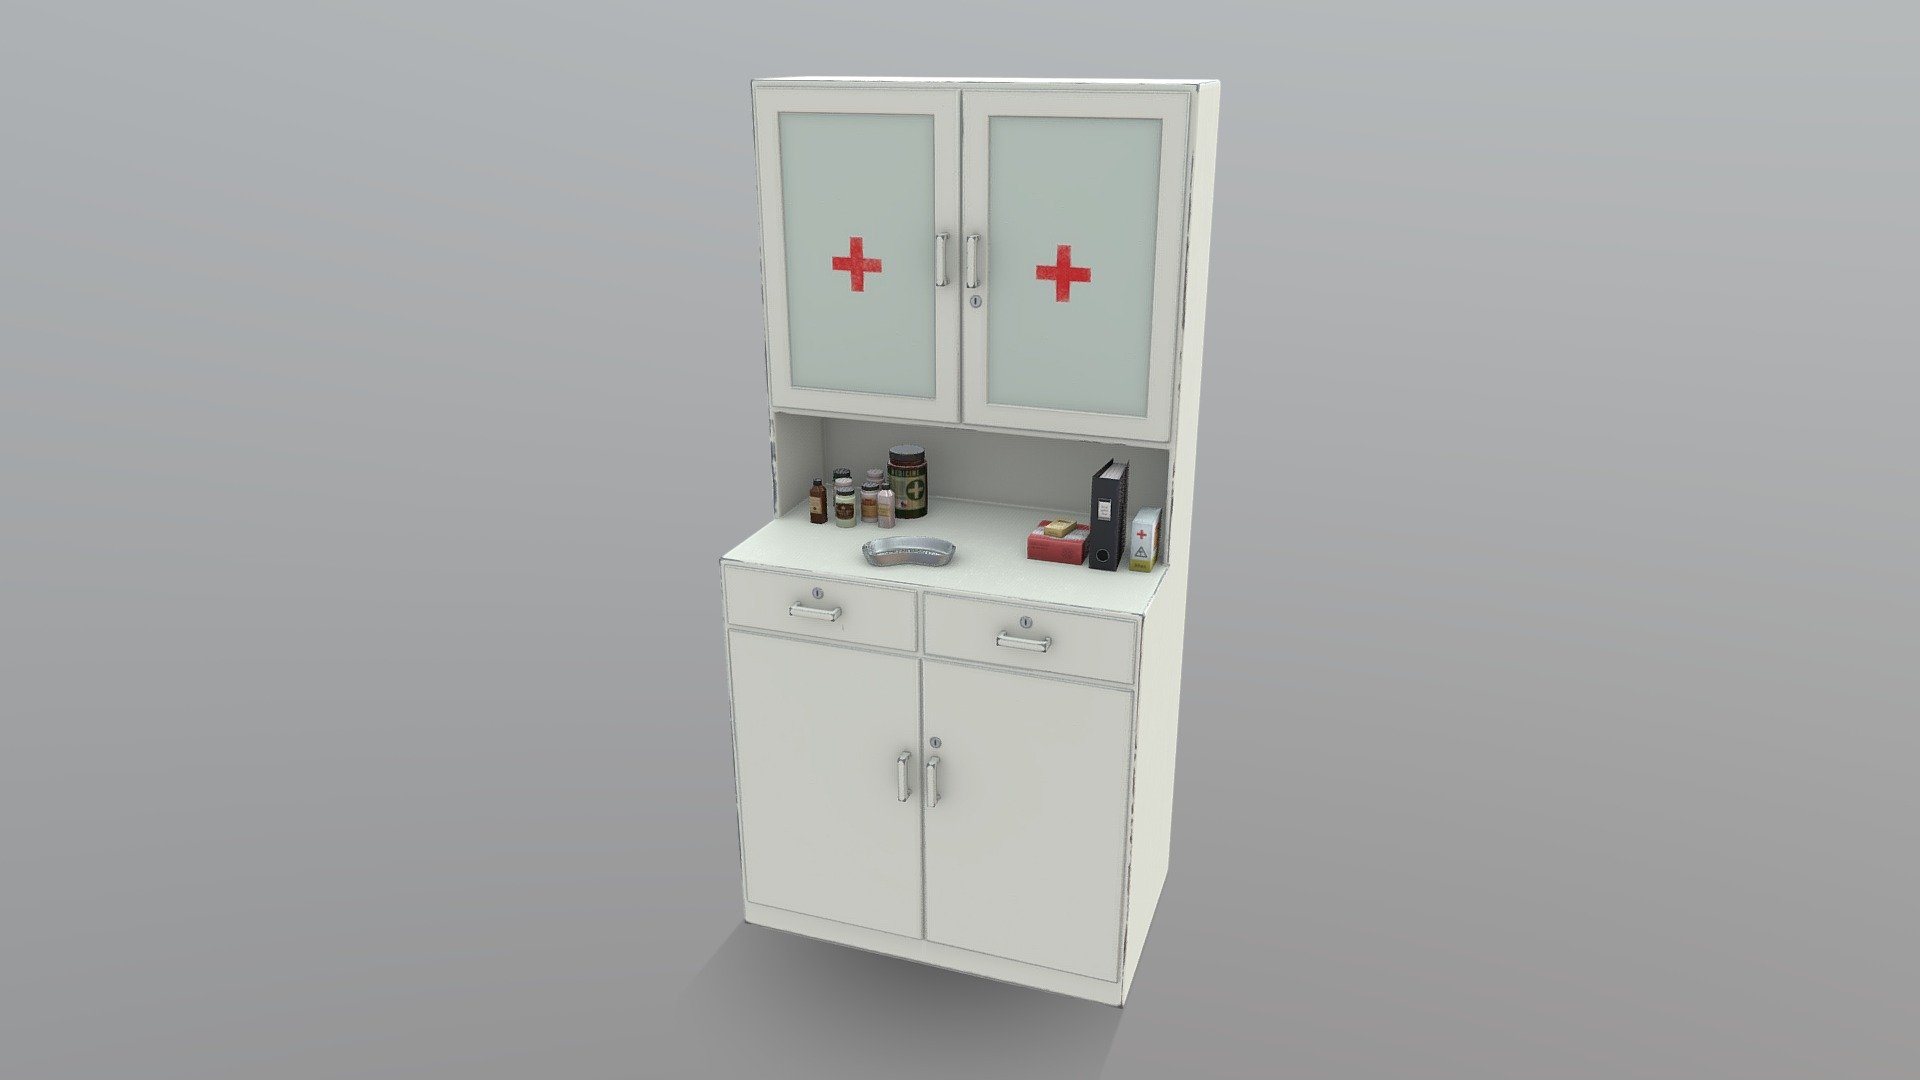 **Hospital Cabinet - Low Poly **
(Real proportions).

Game Ready! 




There are 14 assets in one file, each one has its own name. 

All assets have the same default material. 

There is only one set of PBR textures for all meshes. 

The topology is quad-based. 

There are no ngos in the mesh. 

All medicines labels are fictitious and royalty-free.

Assets: 1 cabinet, 1 binder, 1 bowl, 3 medicine boxes, 8 medicine bottles. 




There is a zip file with .blend, .obj .fbx and textures. 

*object was not modeled for a 3d printer. 

*If you need any mesh ot texture adjustments, let me know 3d model